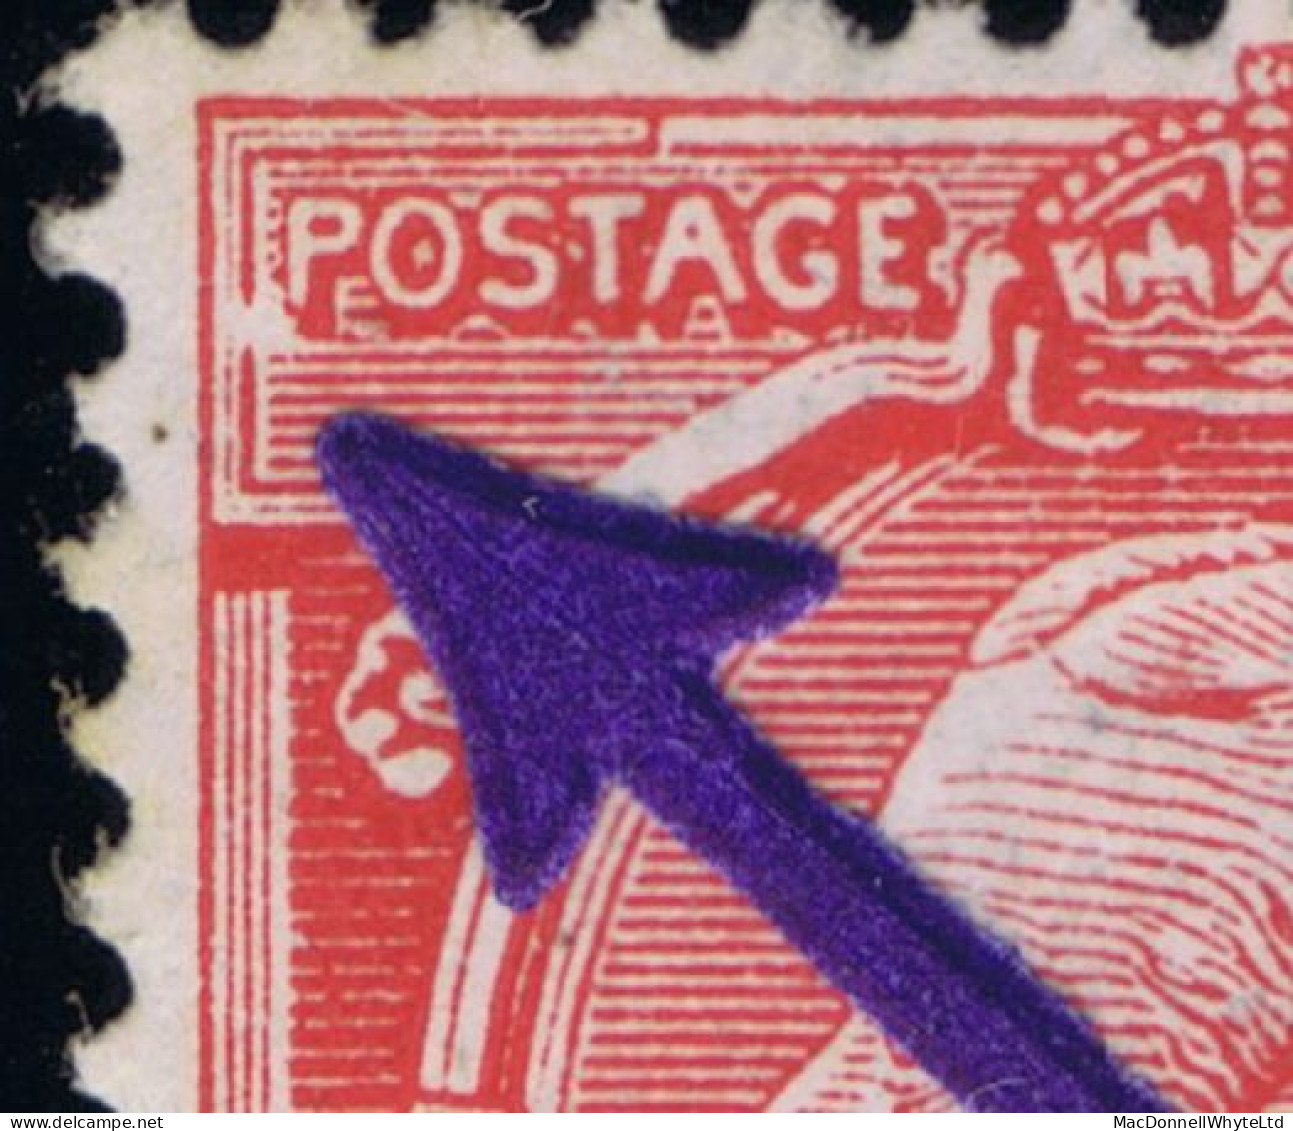 Great Britain 1912-24 Royal Cypher 1d Var. "Inner Frame Break At P" Row20/11 Control Q20 Imperf Single Mint, Stains - Neufs